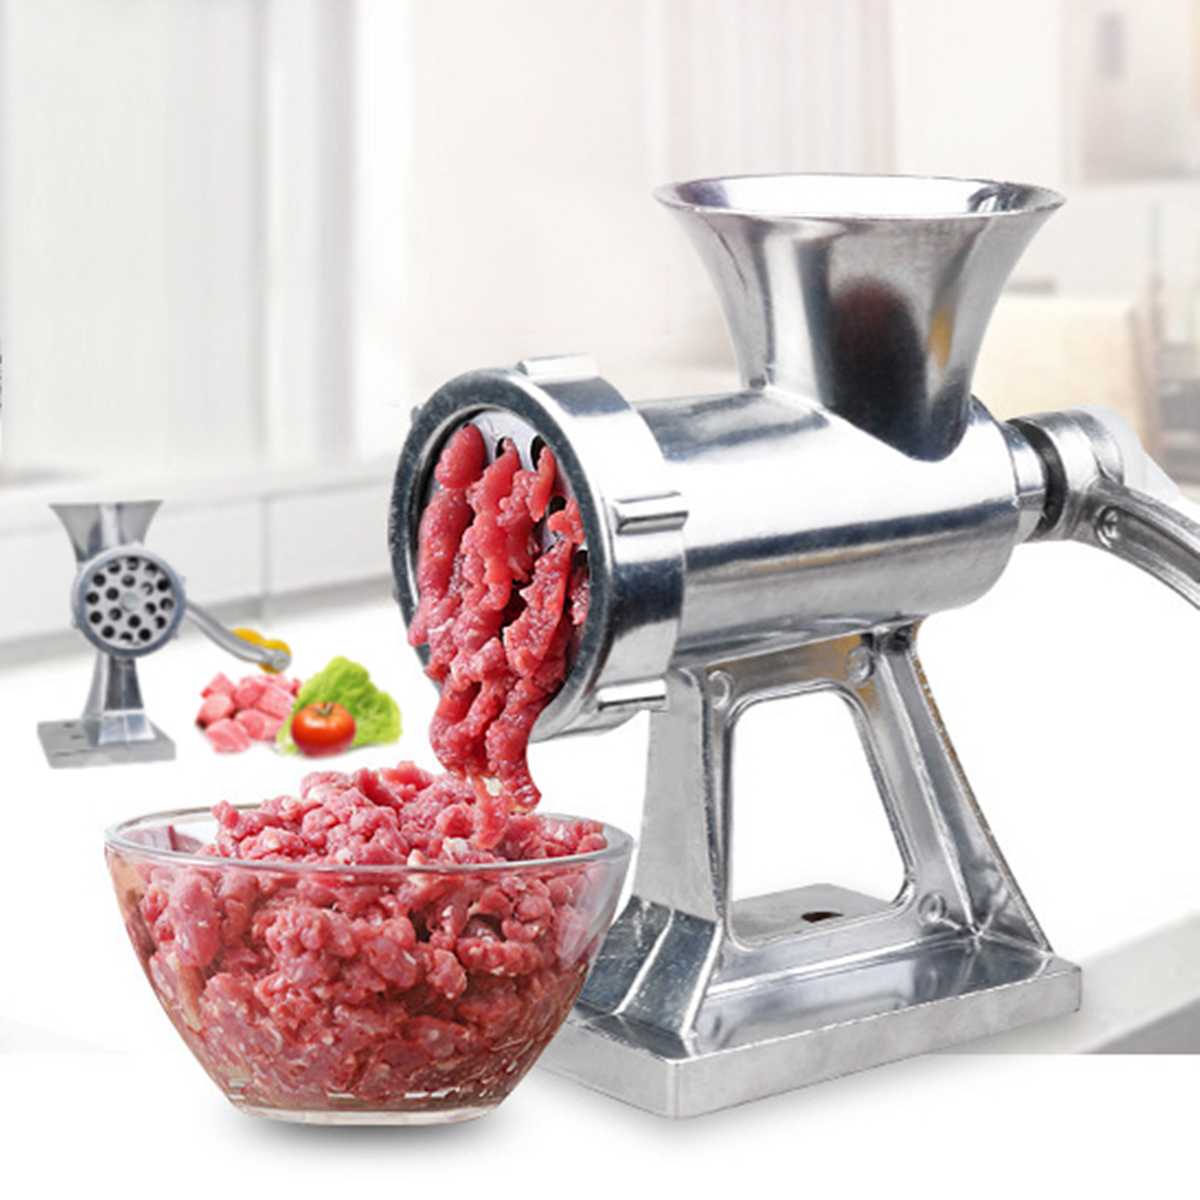 Hand Meat Grinder Sausages Noodles Aluminium Alloy Hand Operate Manual Meat Grinder Kitchen Home Tool for Meat